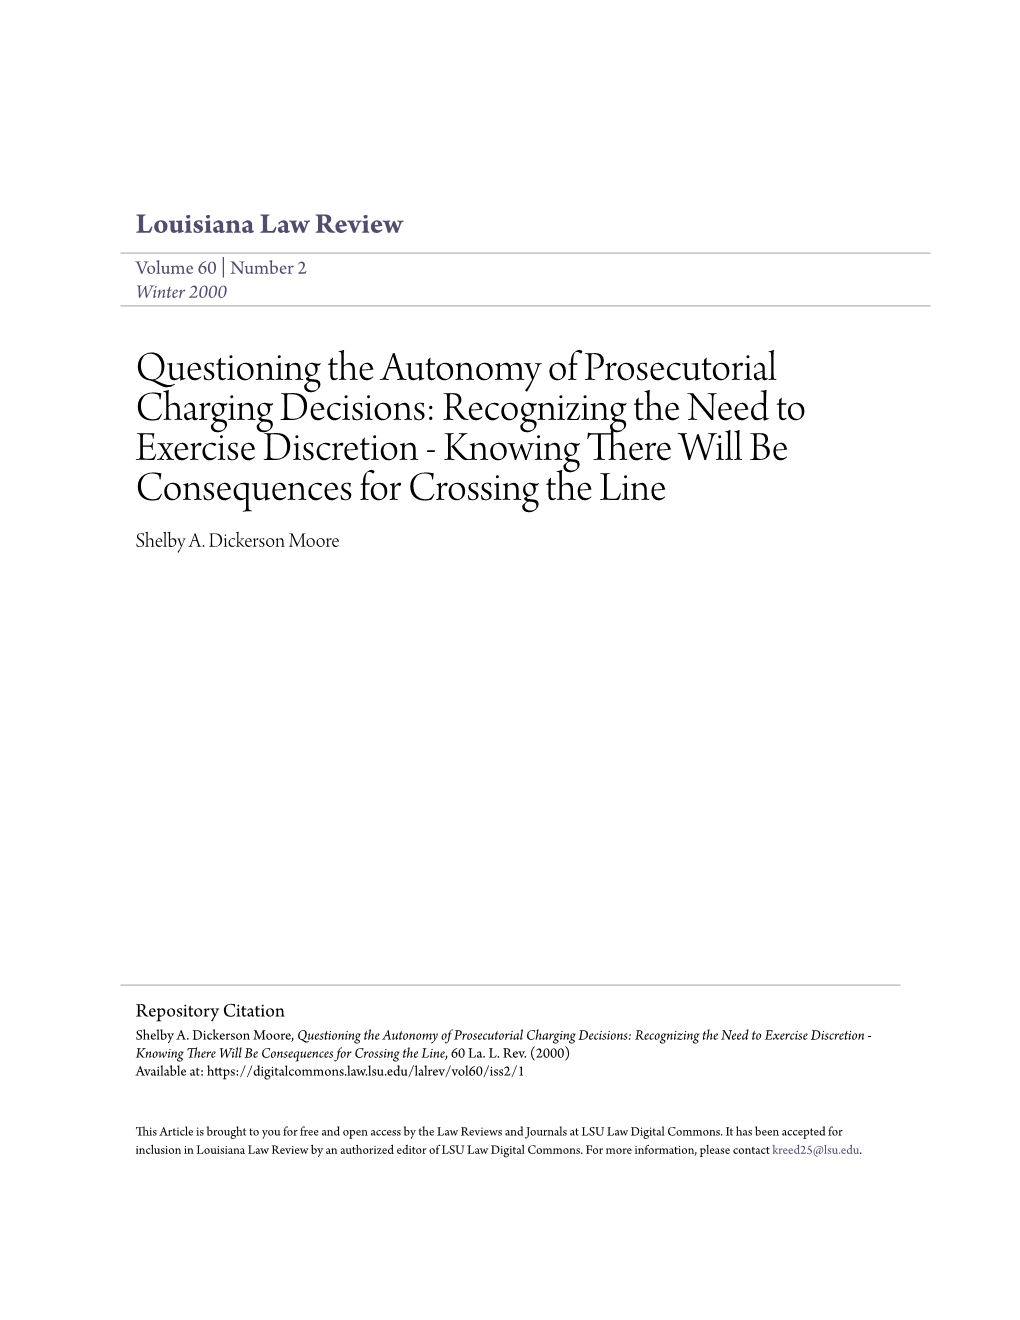 Questioning the Autonomy of Prosecutorial Charging Decisions